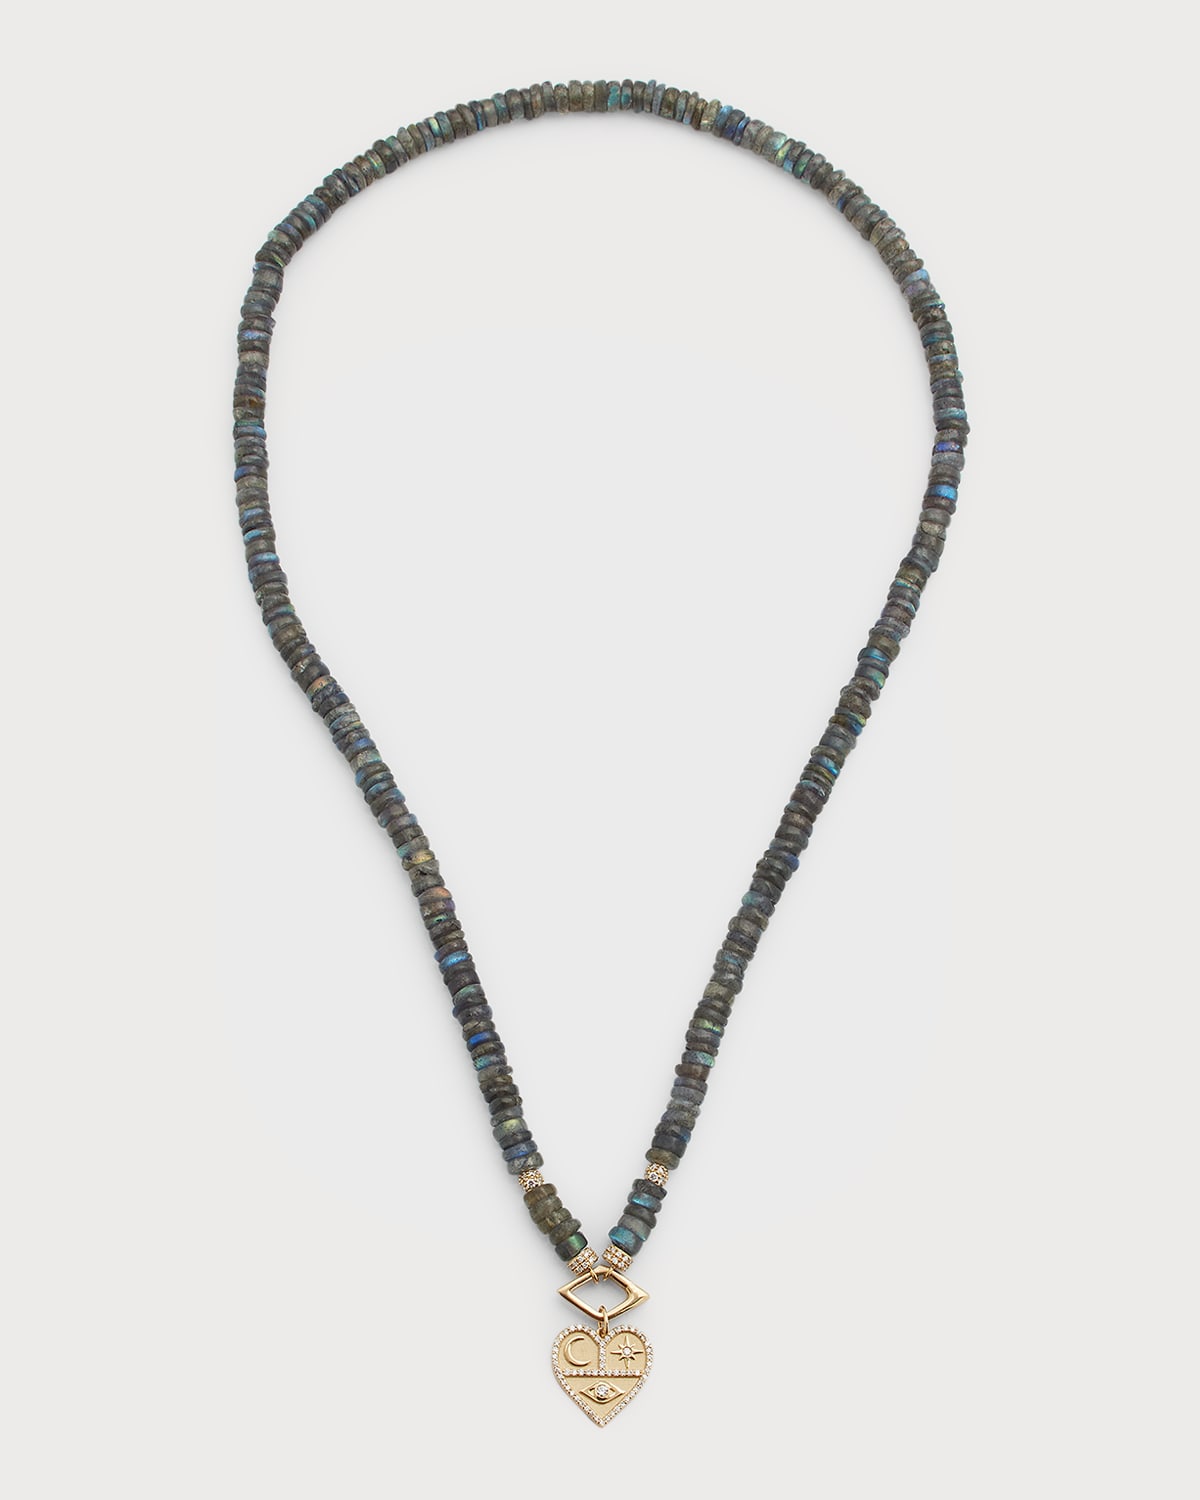 14K Diamond and Labradorite Necklace with Icon Heart Charm